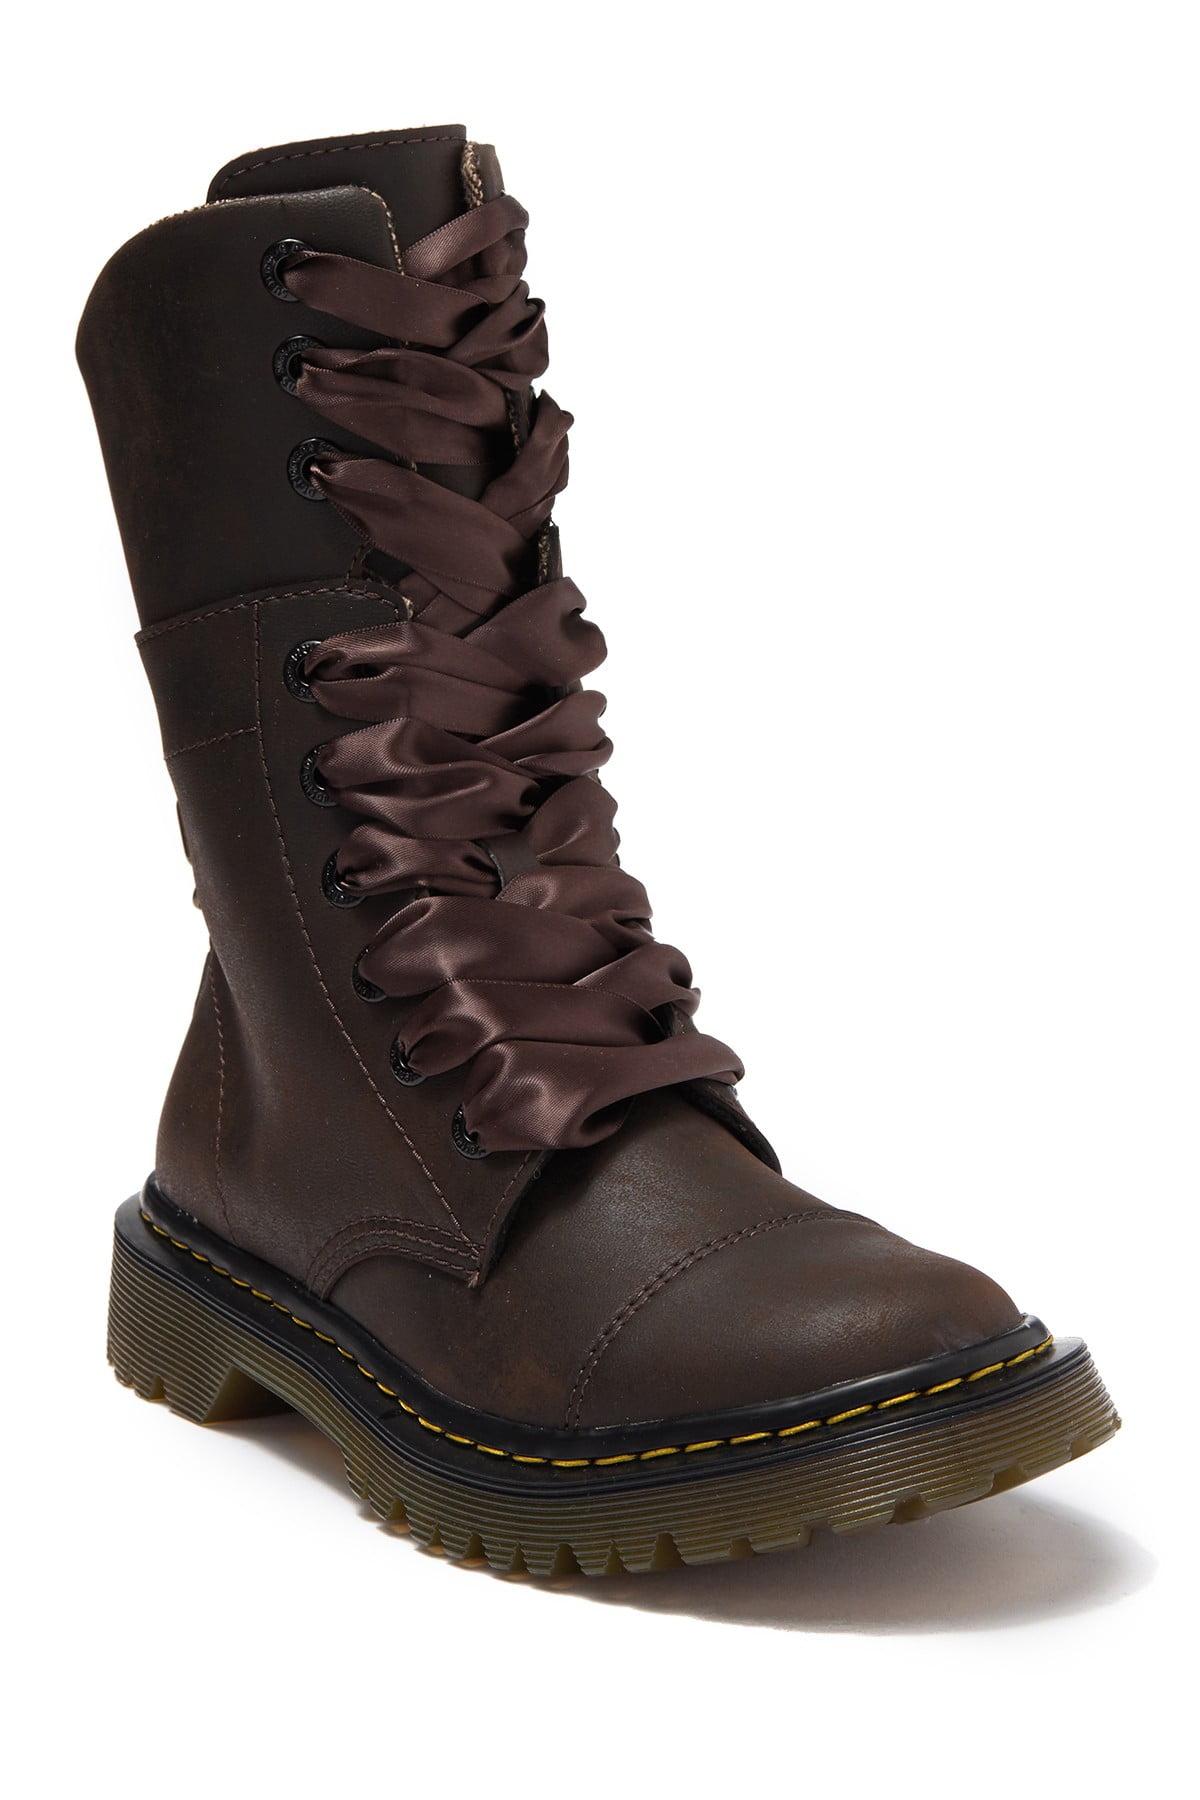 Dr Martens Brown Laces Clearance Price, 62% OFF | maikyaulaw.com